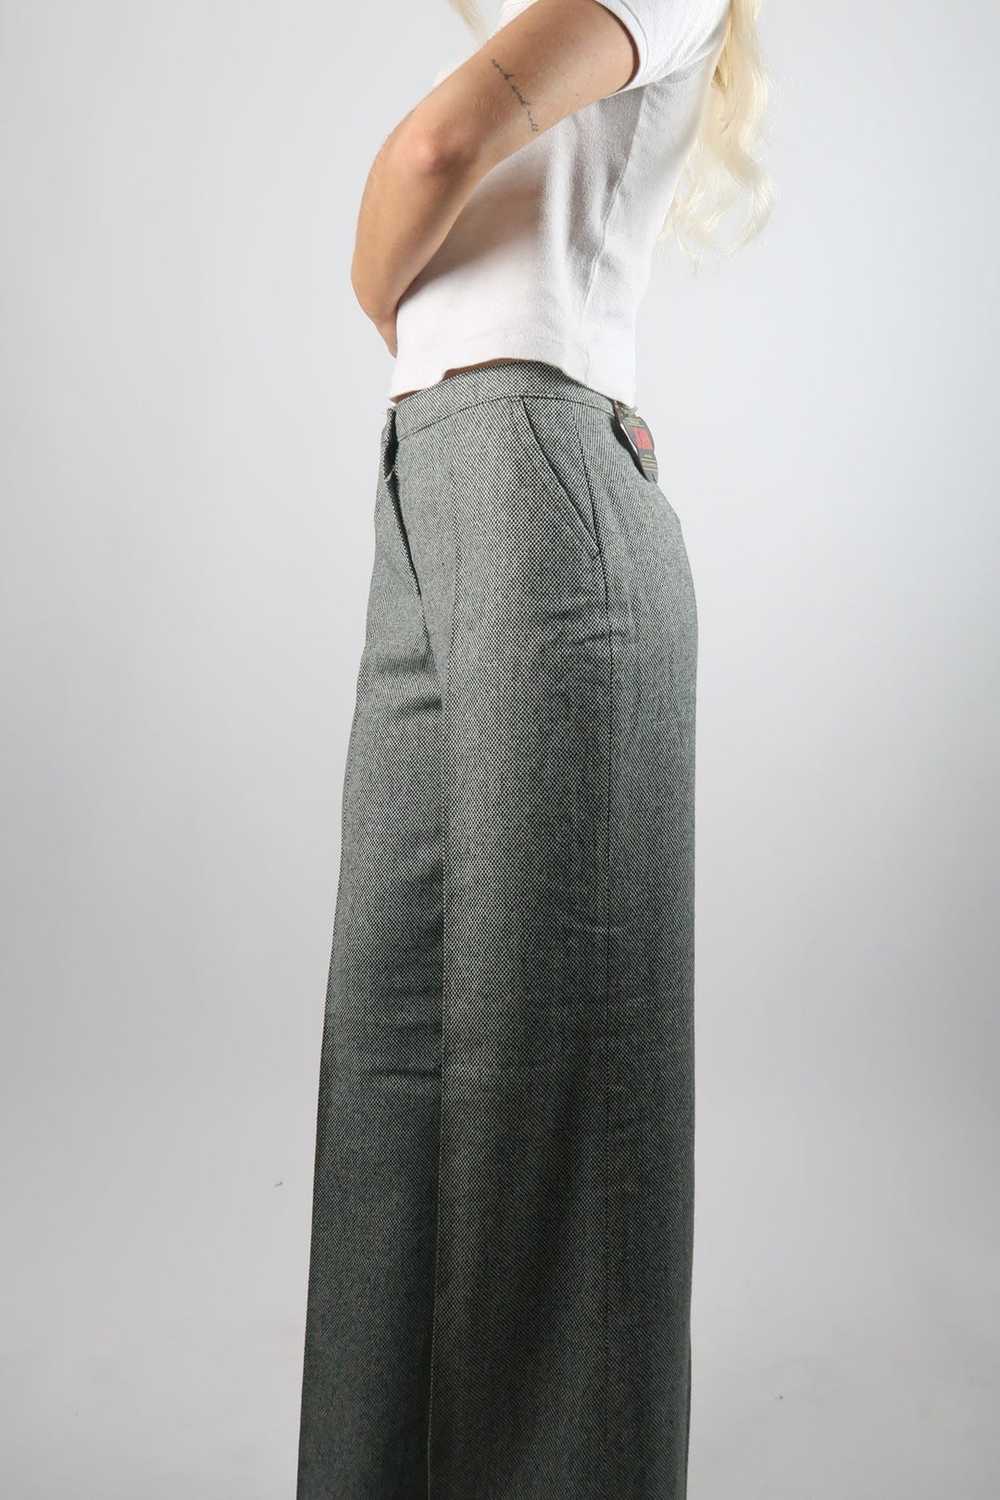 1970s deadstock wool flares - image 5